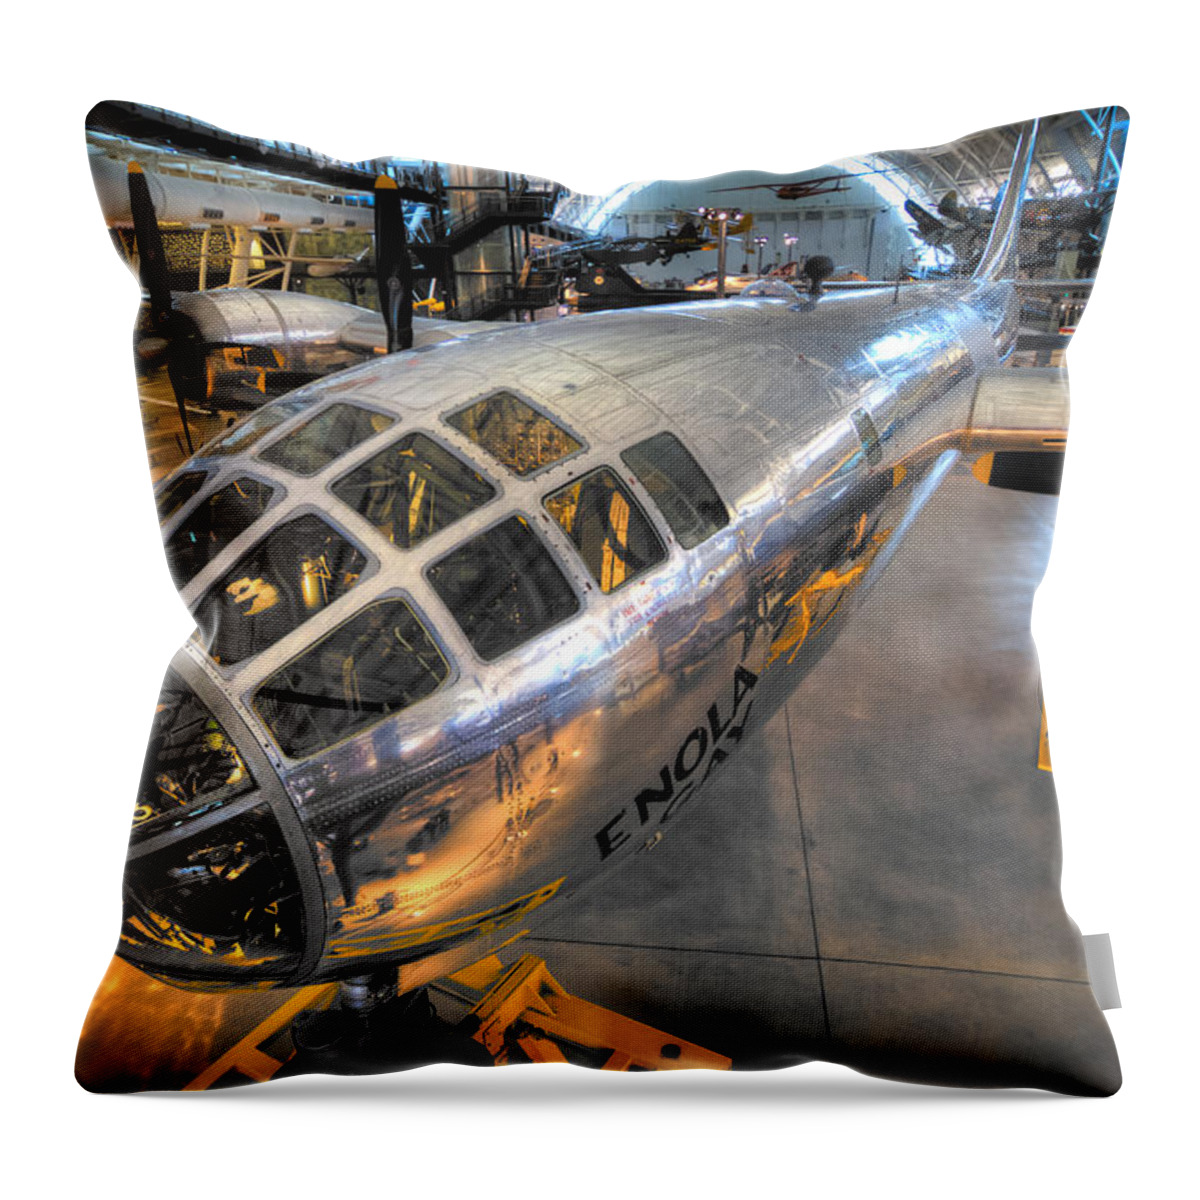  Throw Pillow featuring the photograph Enola Gay by Tim Stanley